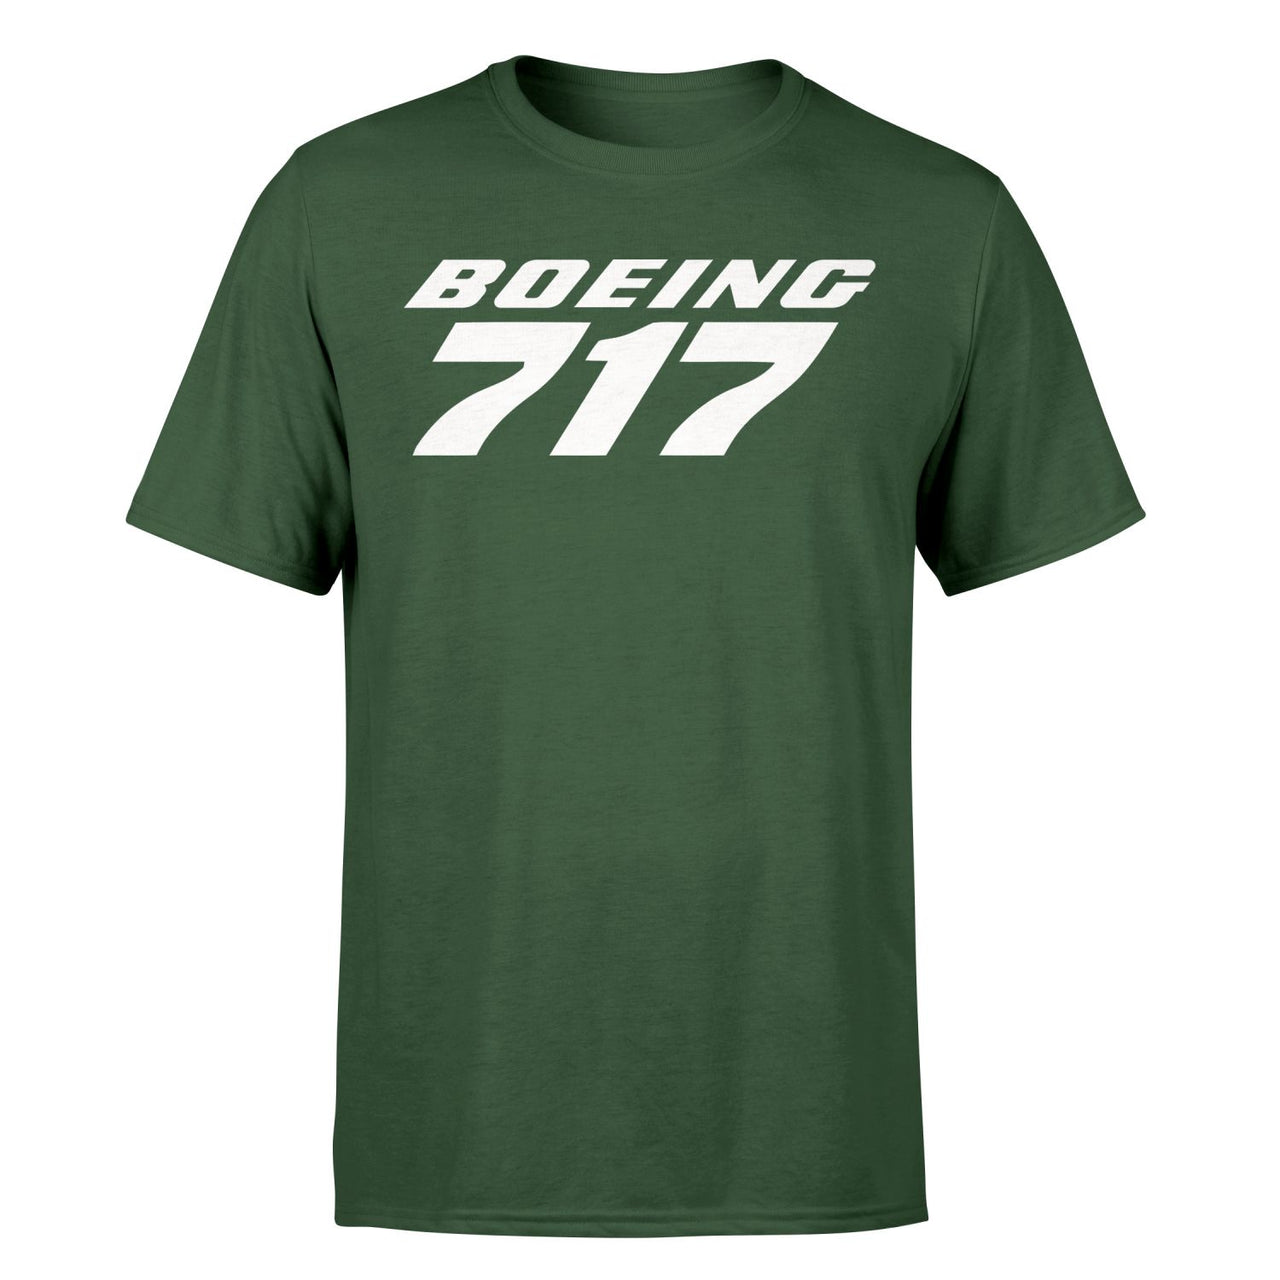 Boeing 717 & Text Designed T-Shirts